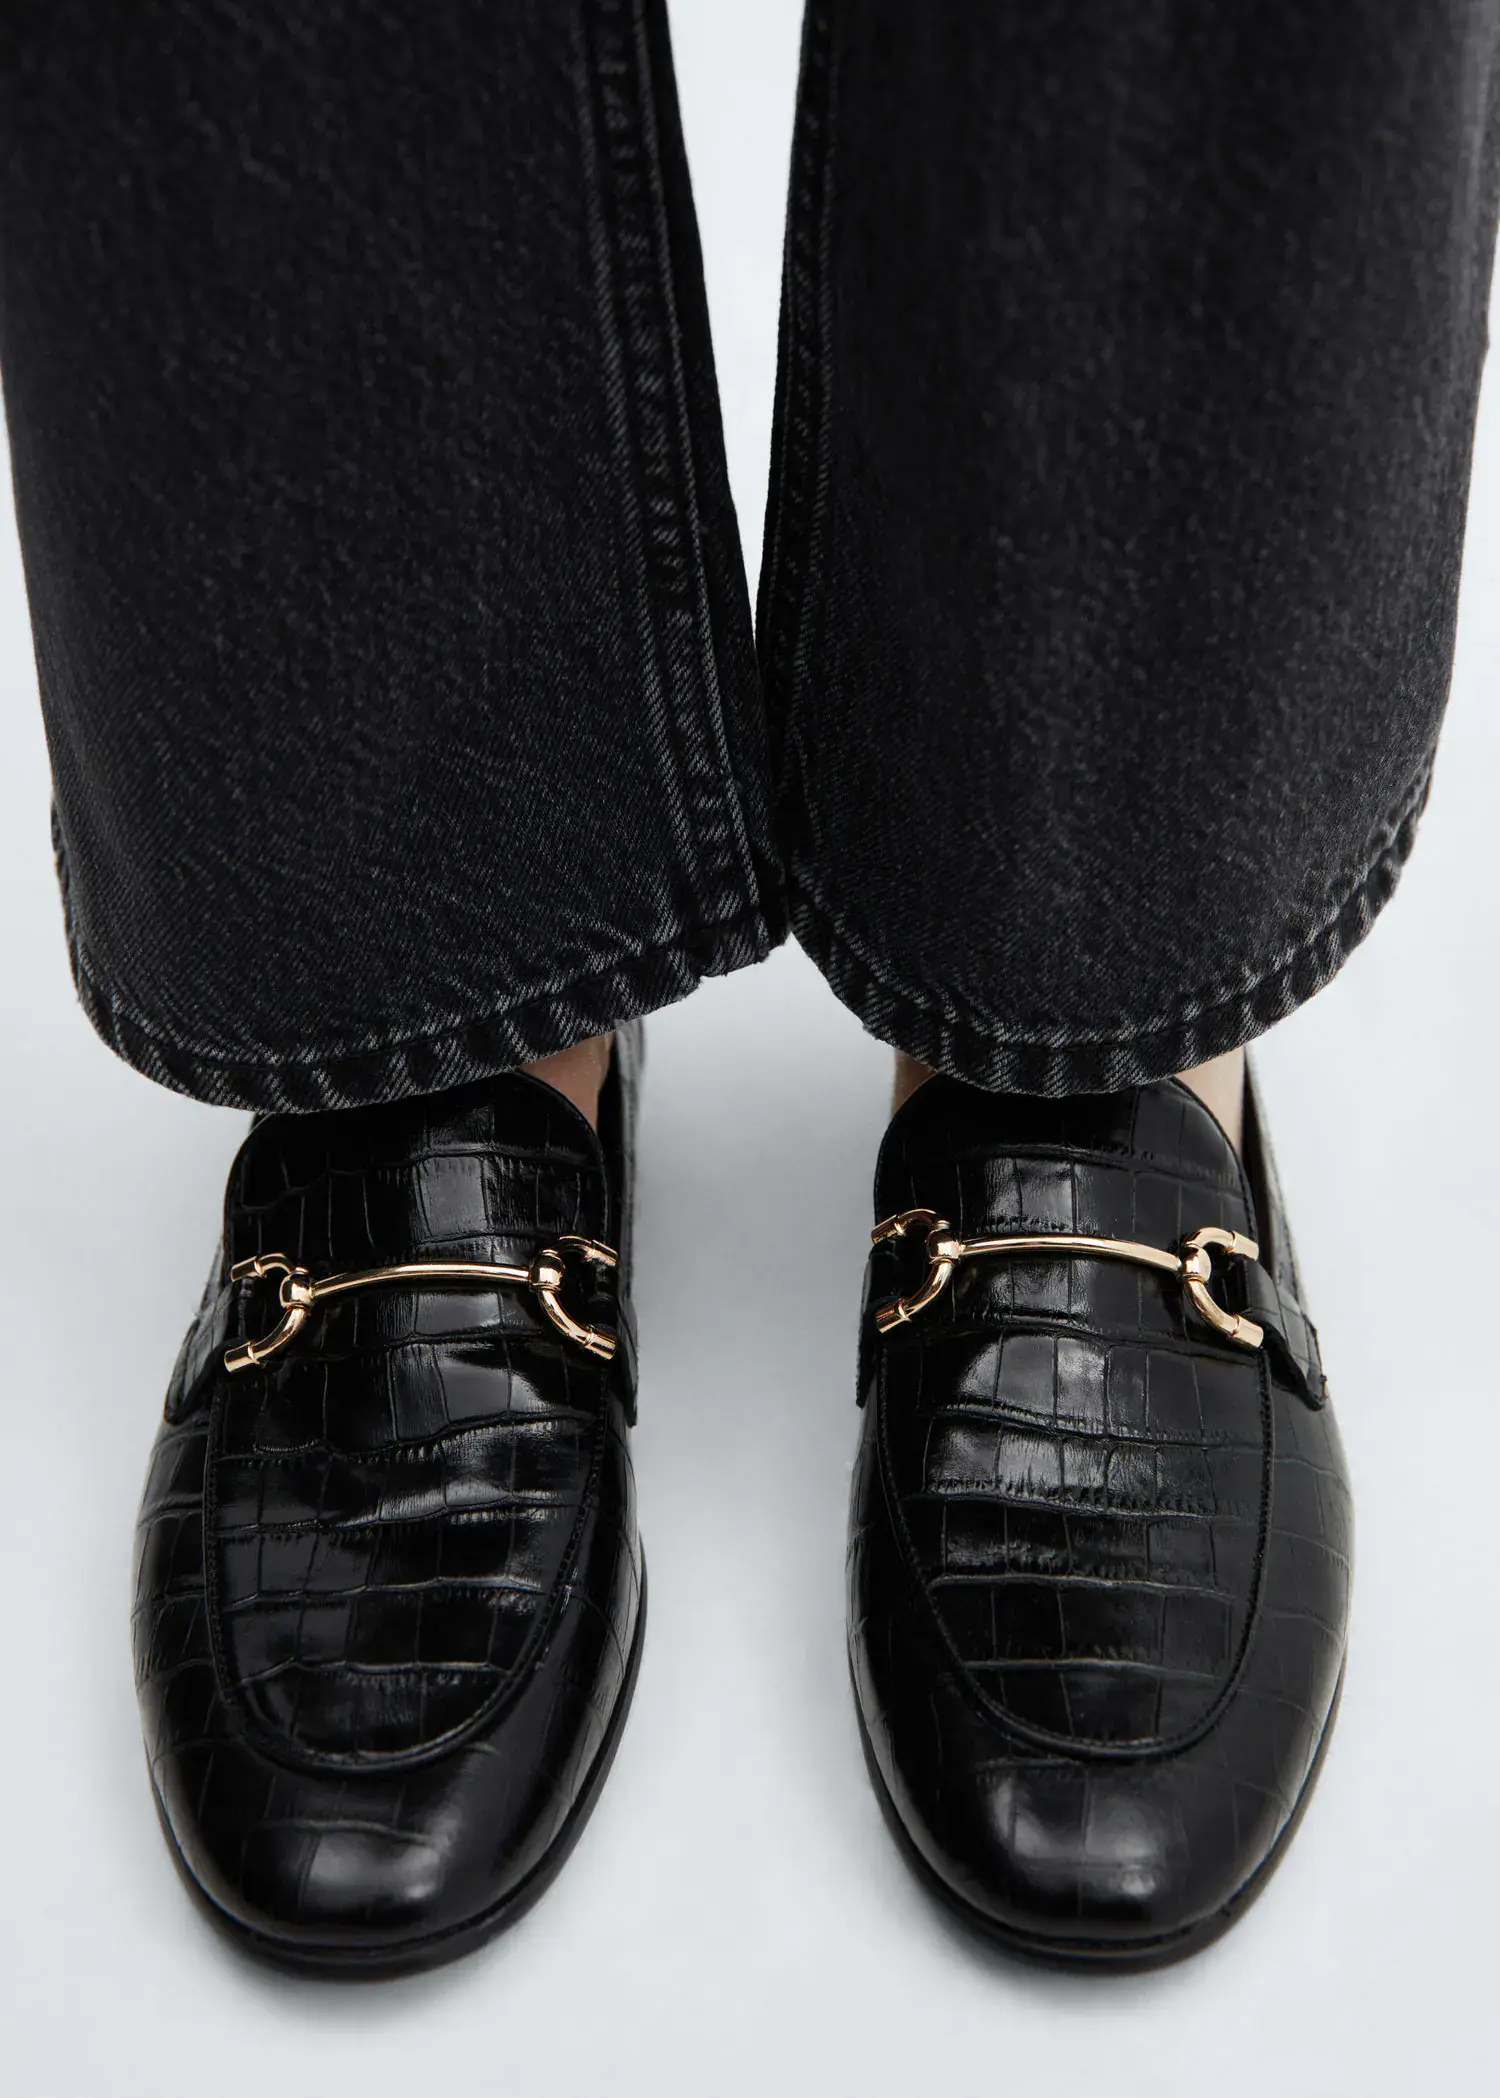 Mango Leather moccasins with metallic detail. 1